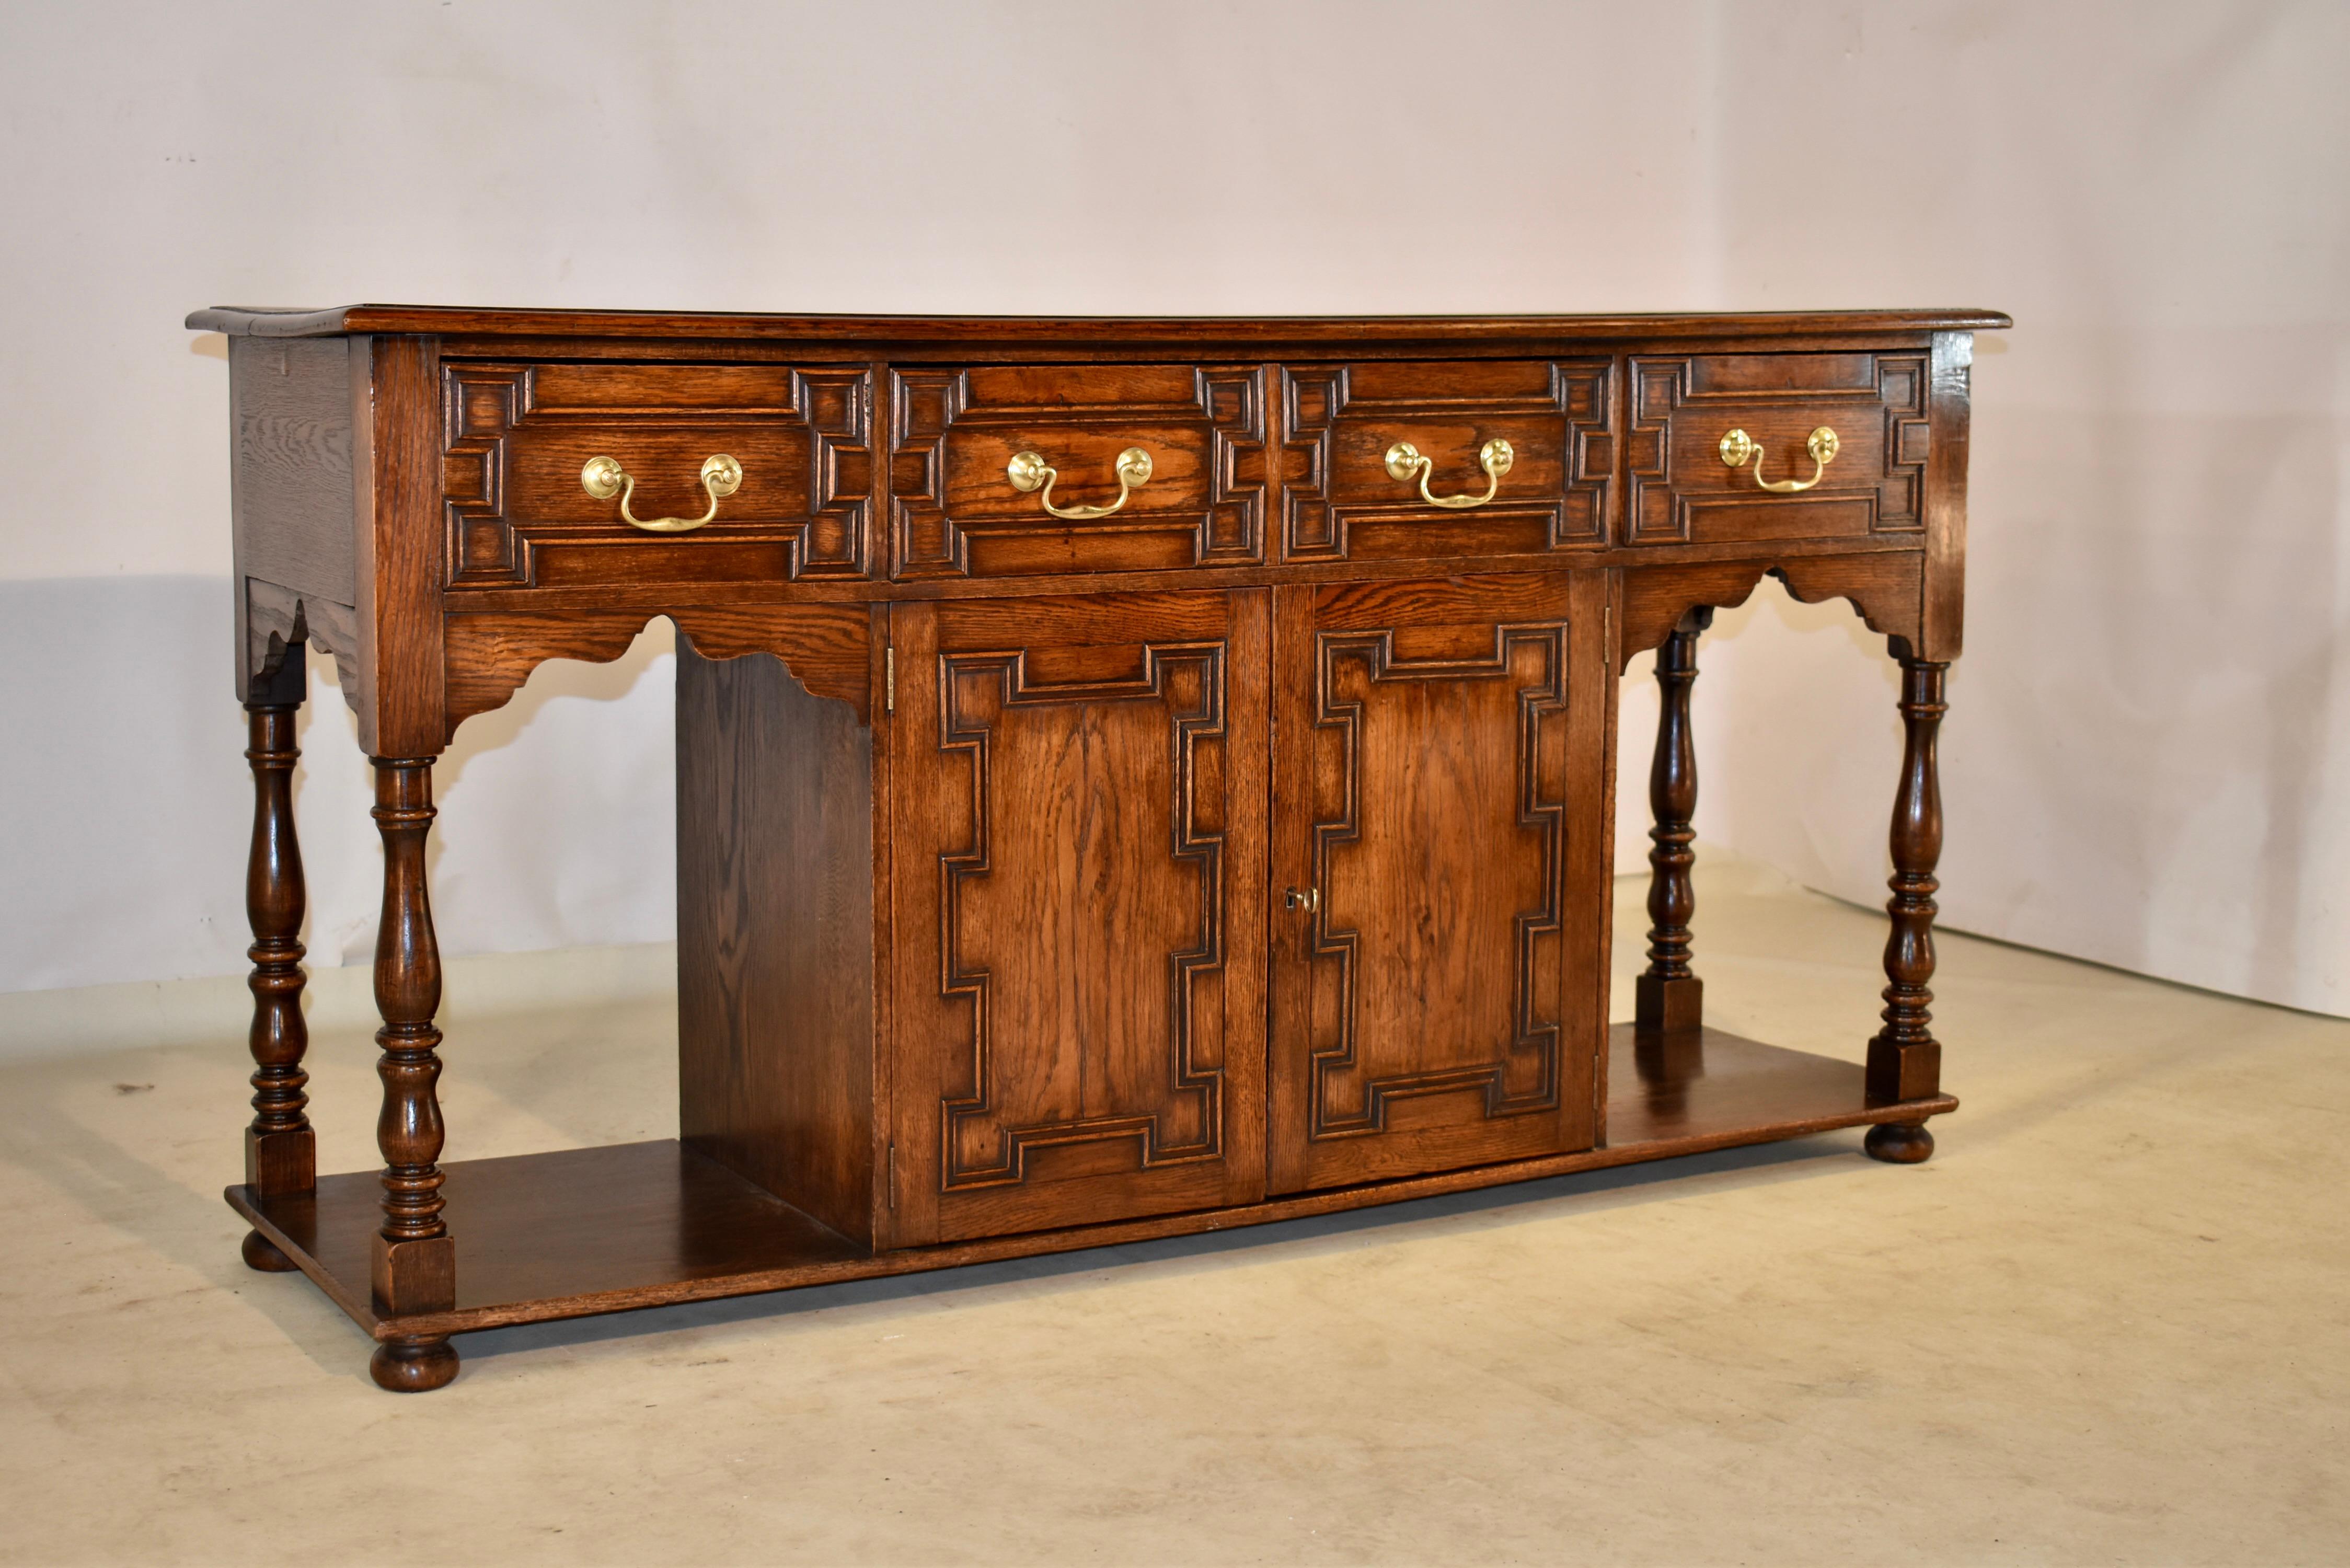 Edwardian oak server from England, circa 1910. The top is wonderfully grained and has a plate rail along the back and a beveled edge. This follows down to simple sides with hand scalloped aprons and three paneled drawers in the front over two doors,